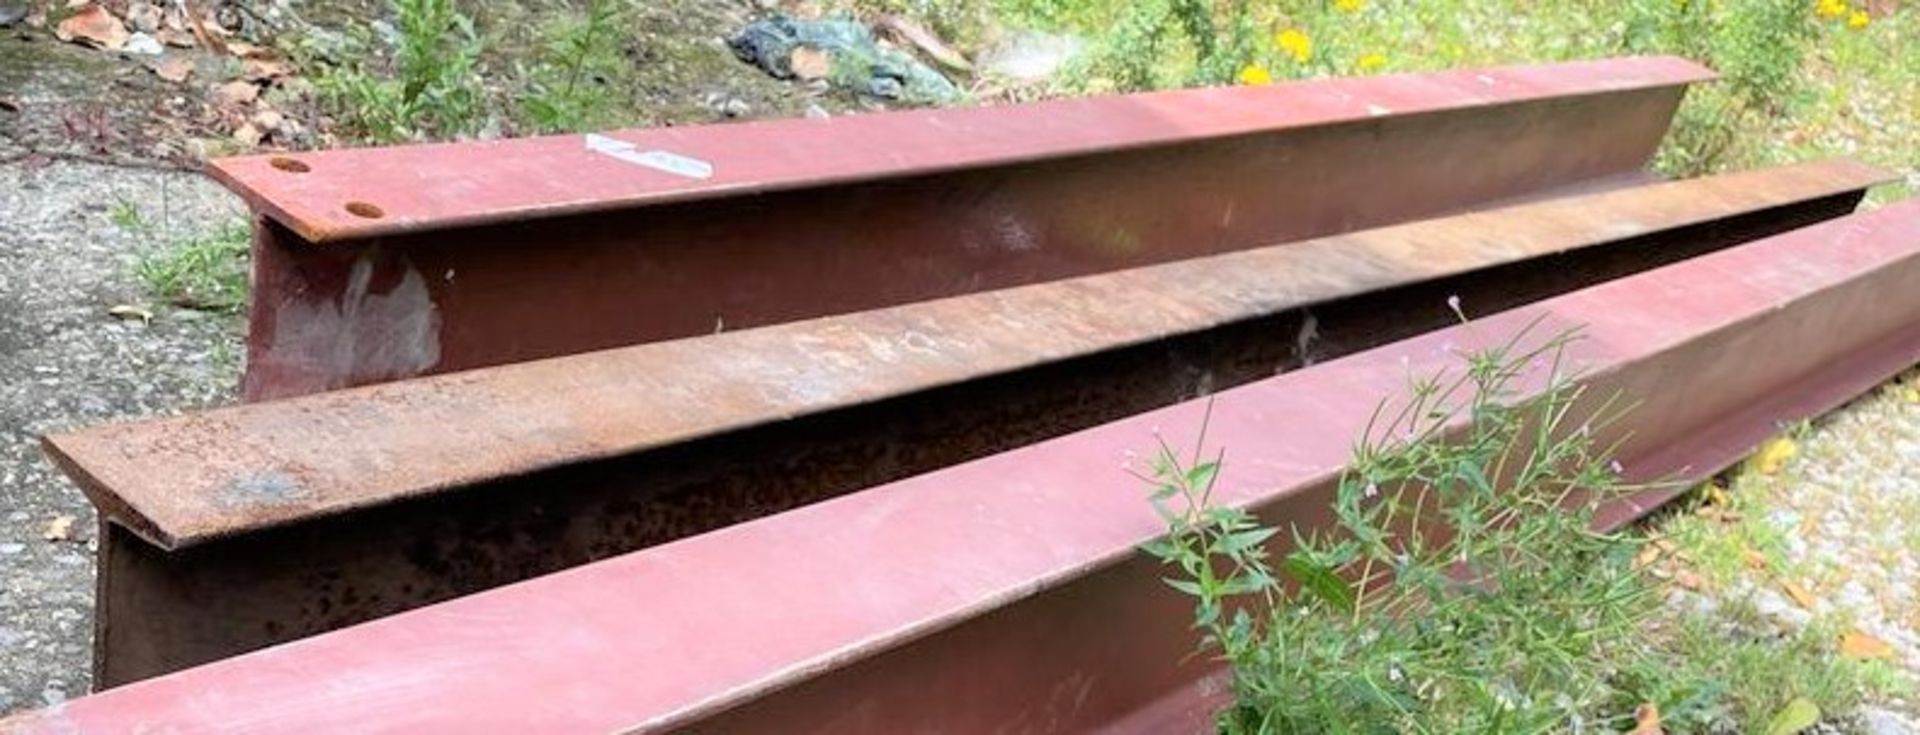 2 x Universal RSJ Steel Beams - Size: 303x10x20cms - Good Condition - CL007 - Location: Stockport - Image 2 of 3